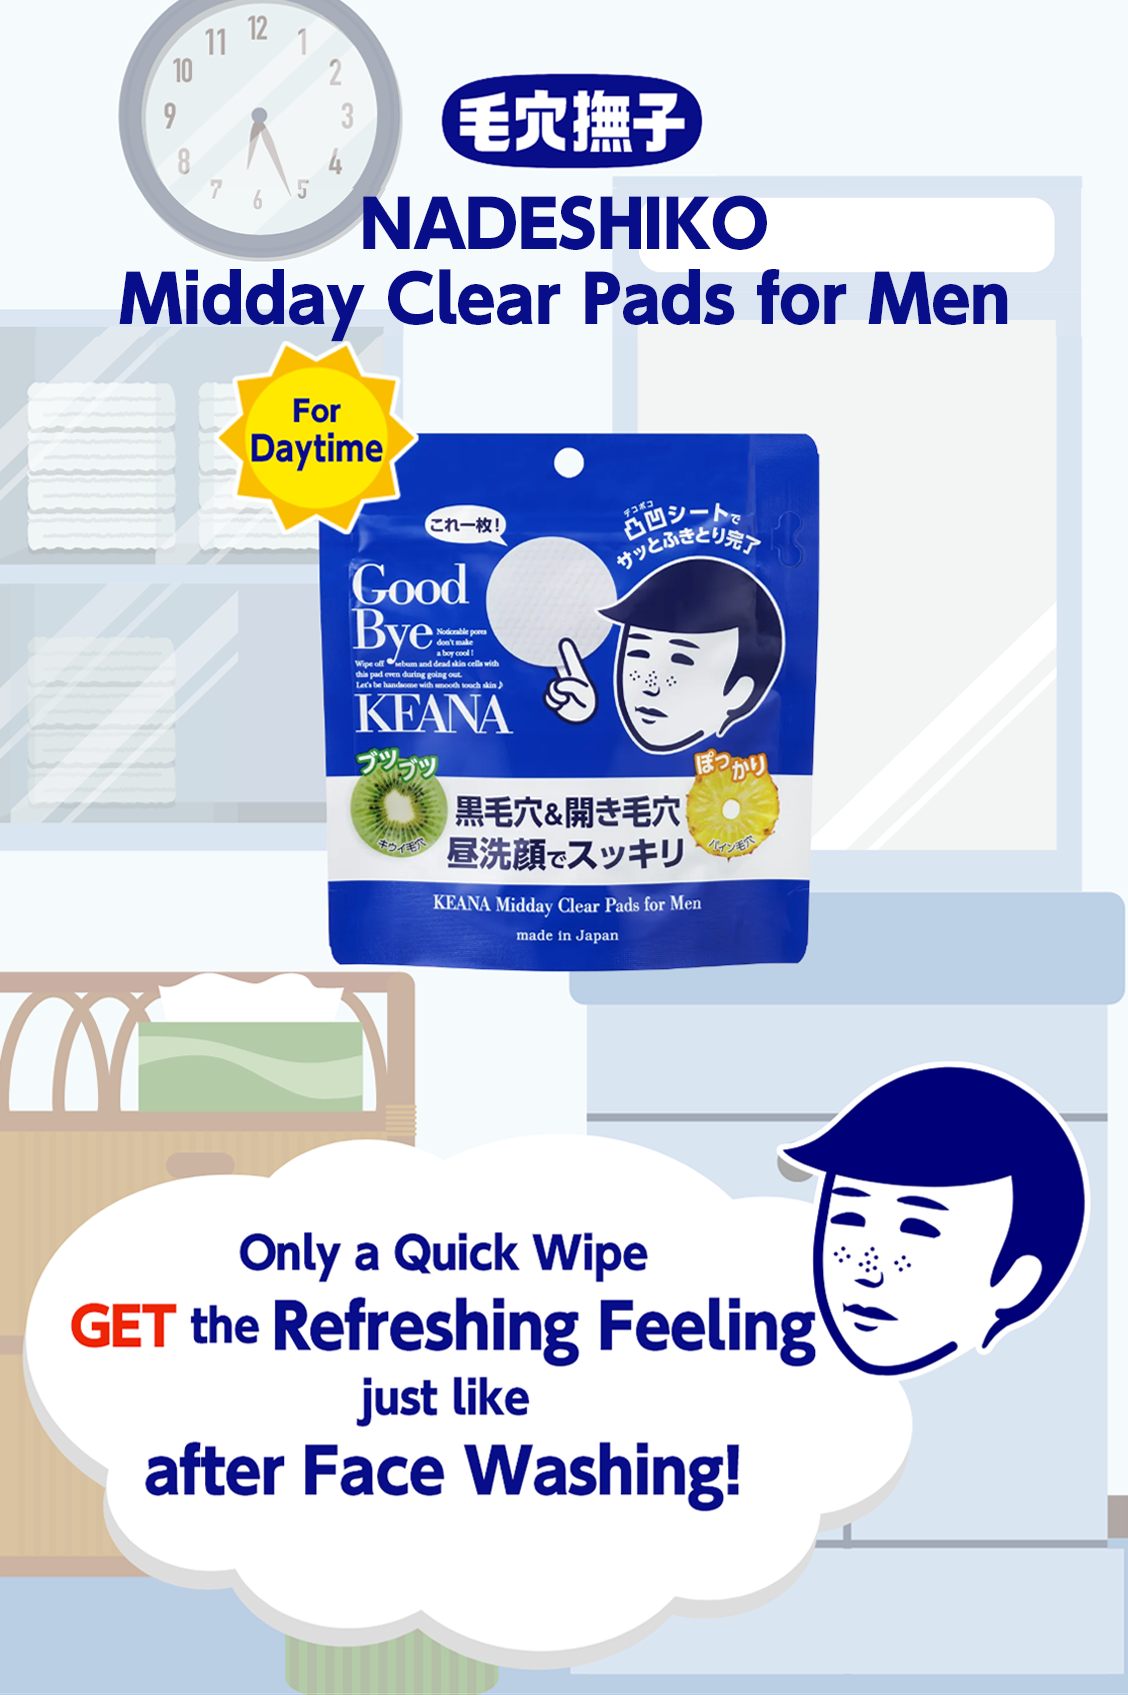 NADESHIKO Midday Clear Pads for Men